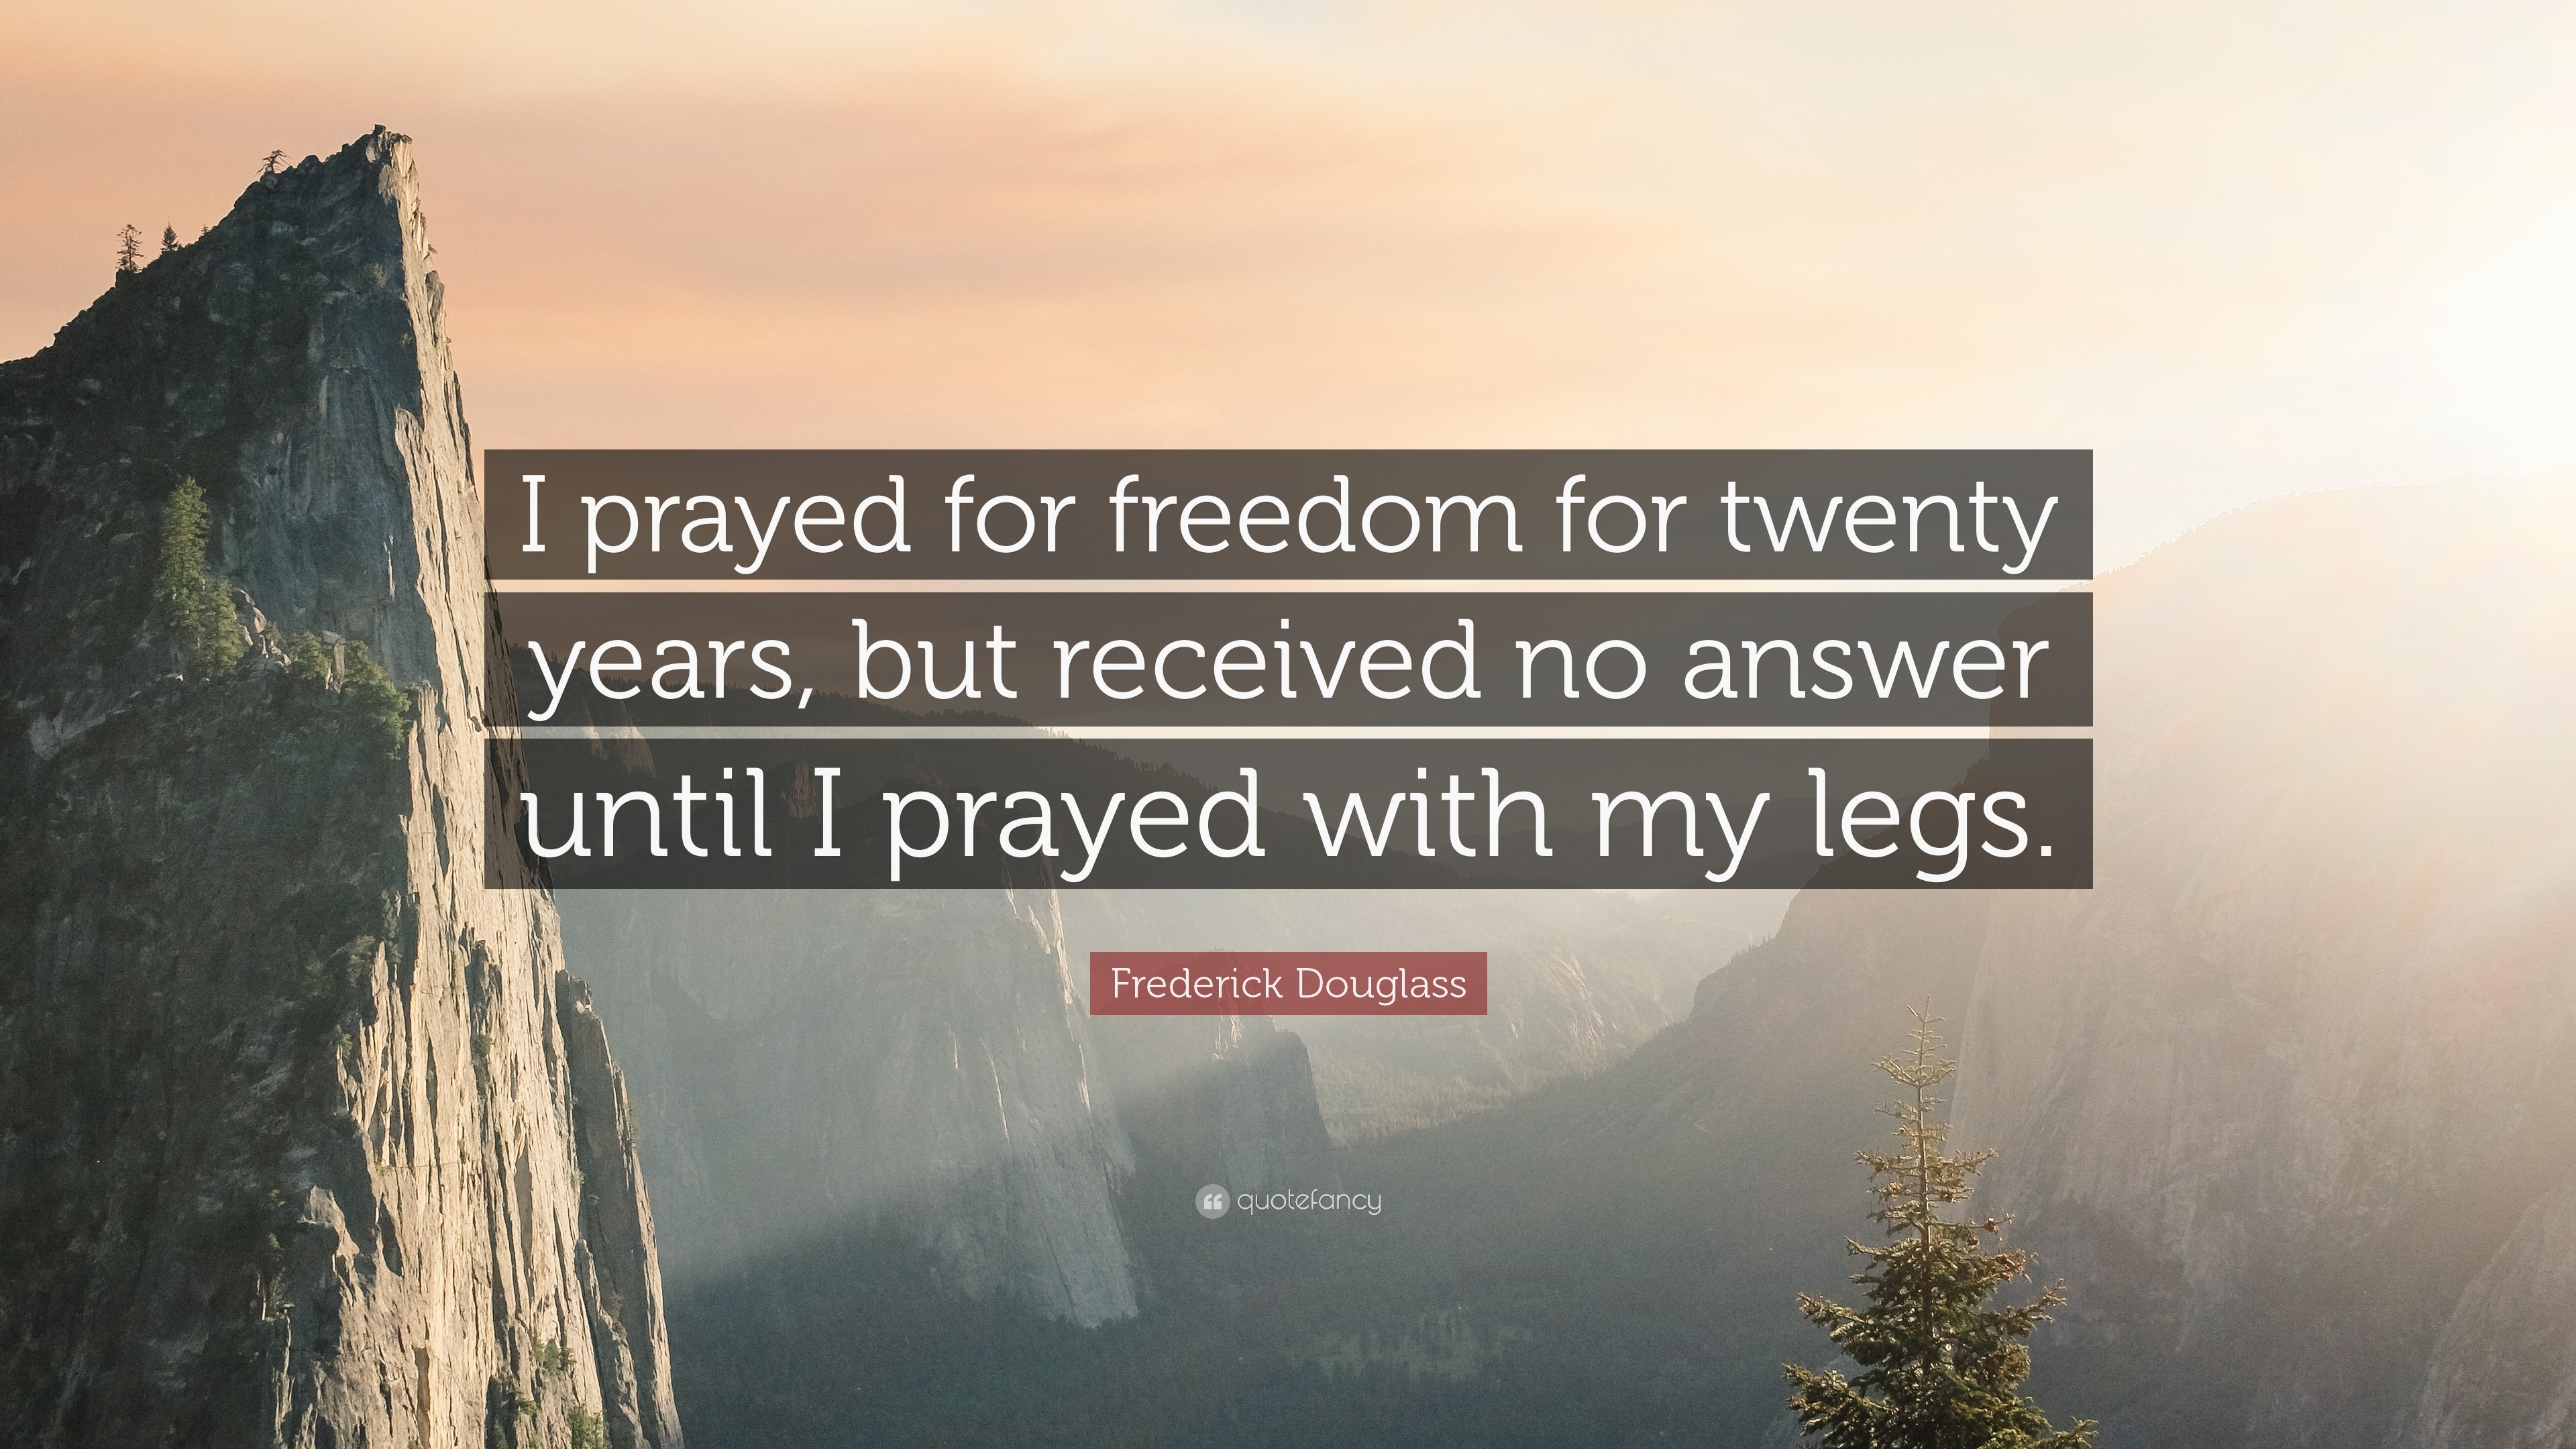 Frederick Douglass Quote: “I prayed for freedom for twenty years, but